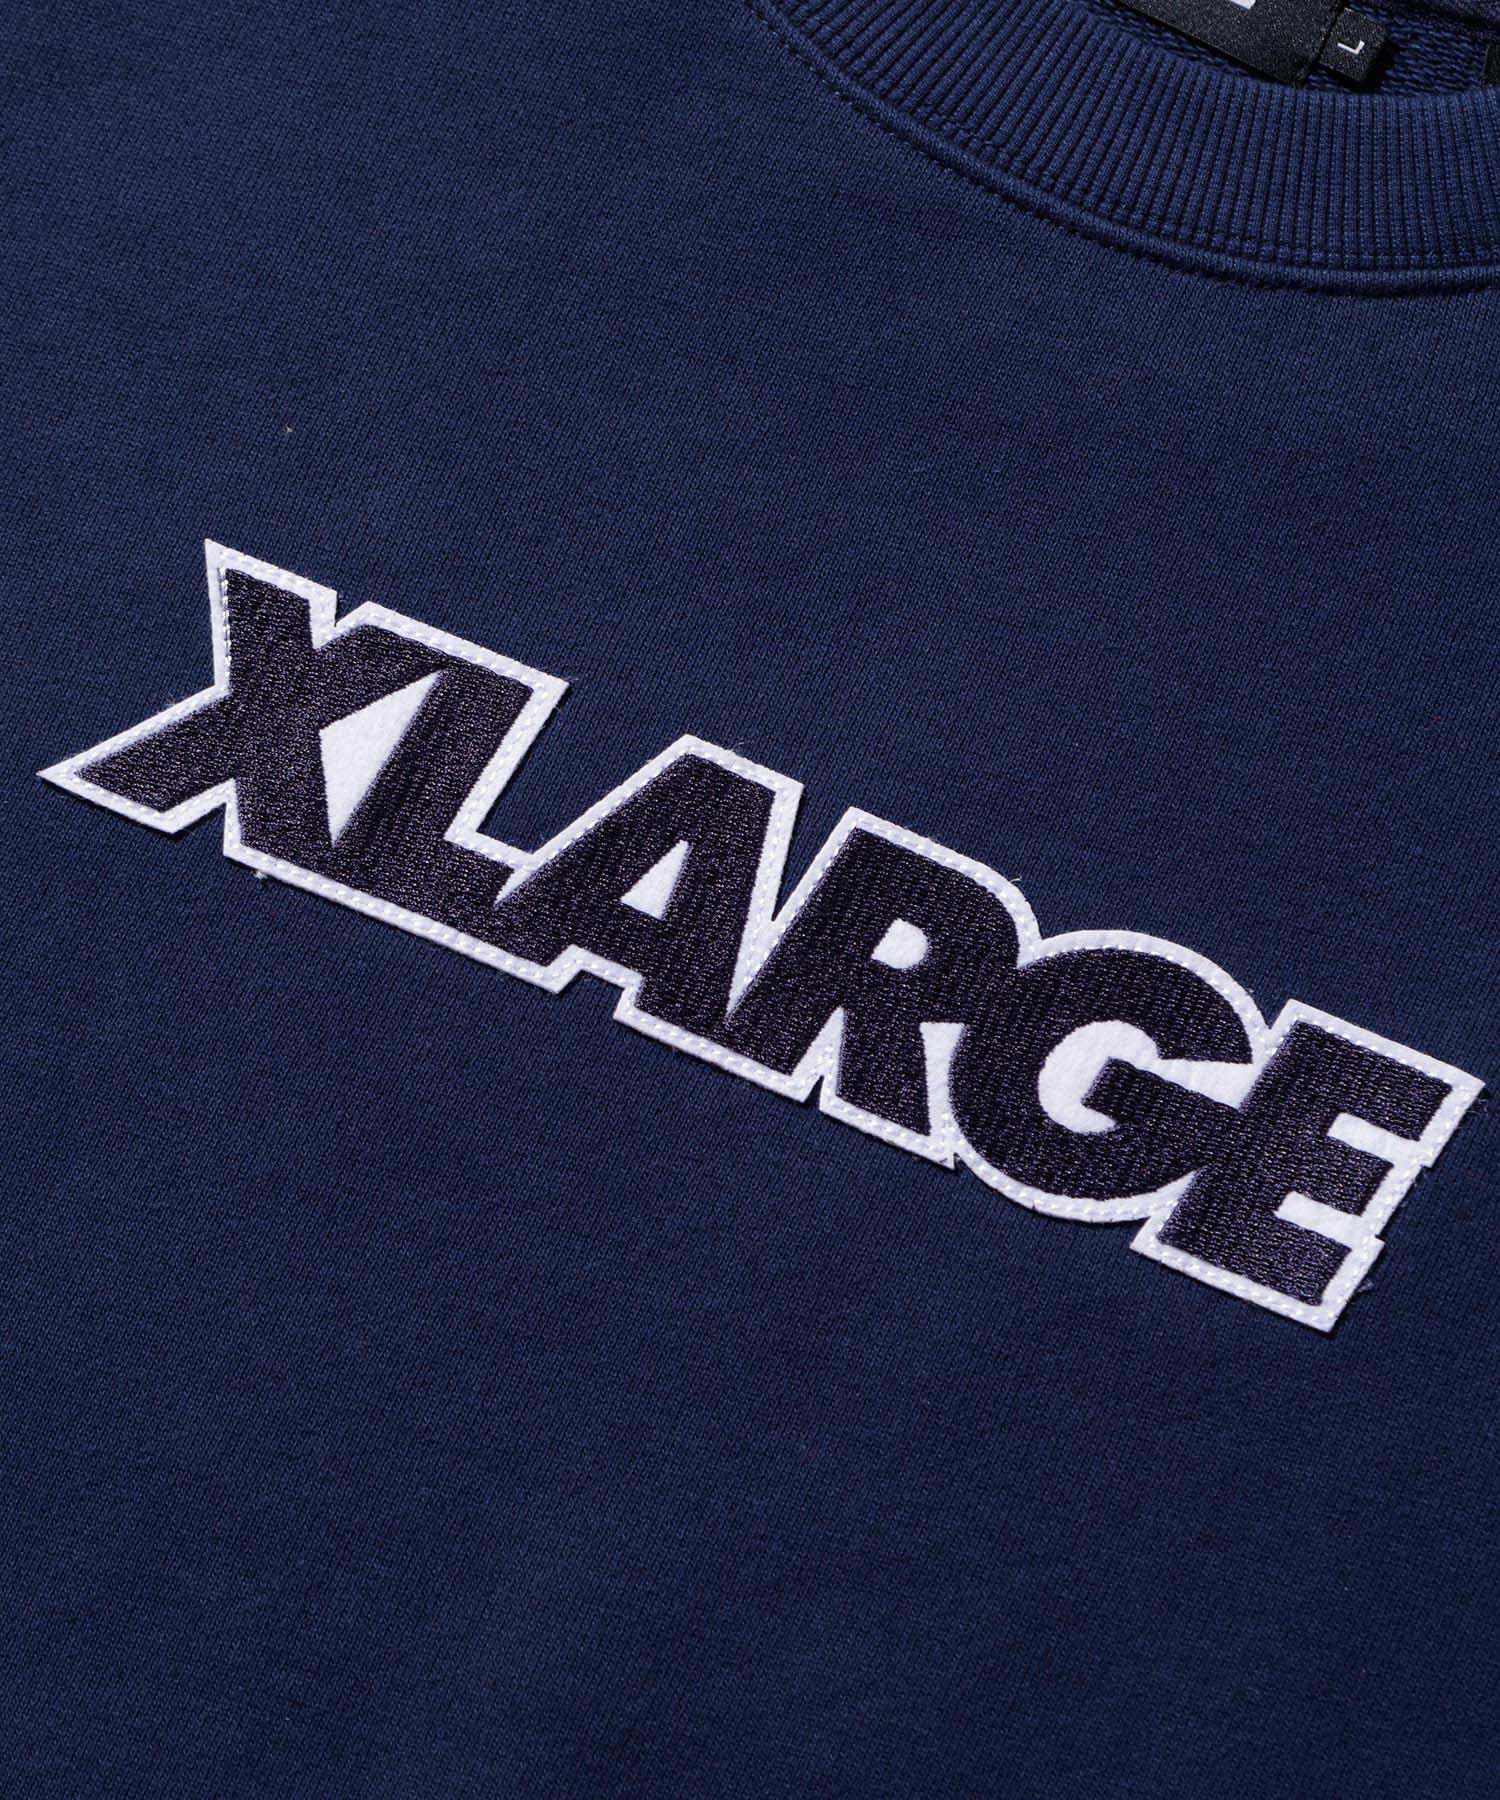 STANDARD LOGO PATCHED CREW NECK SWEAT | XLARGE